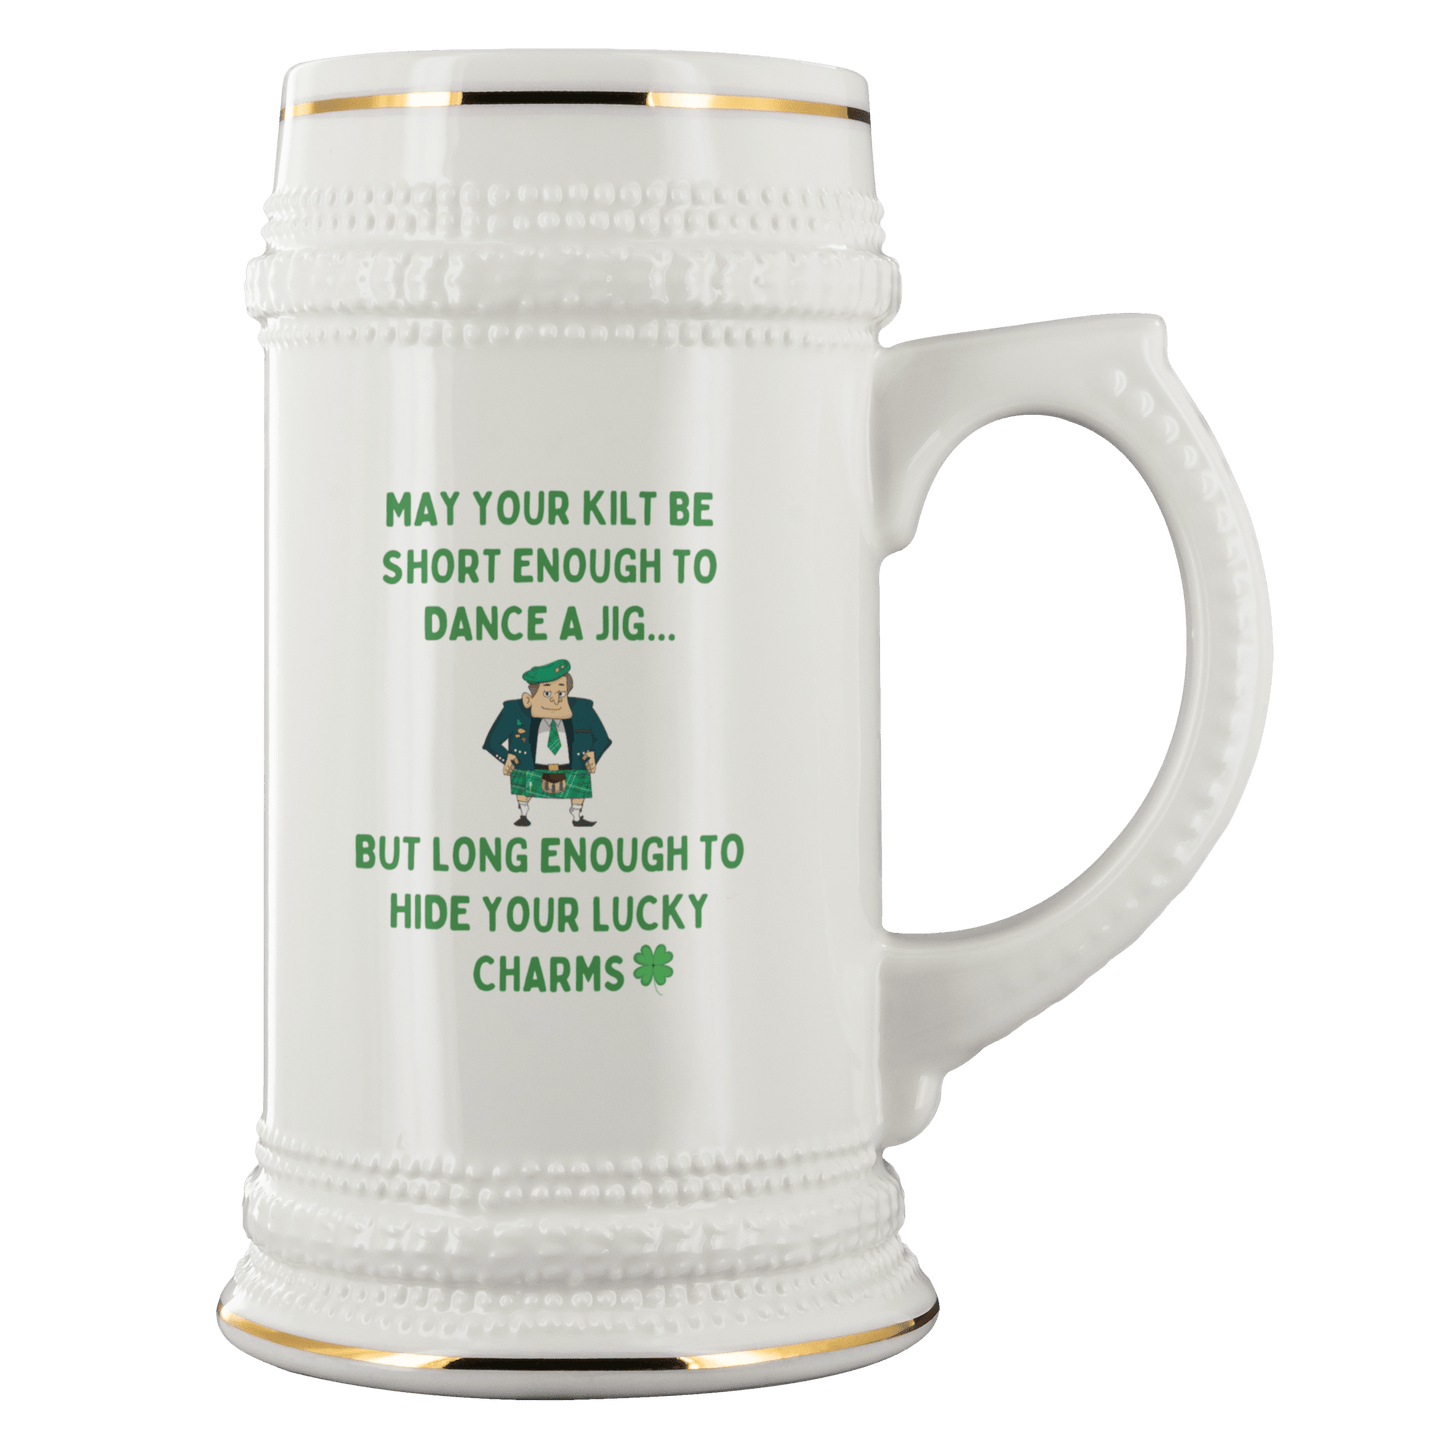 May Your Kilt Be Short Enough To Dance a Jig - Beer Stein